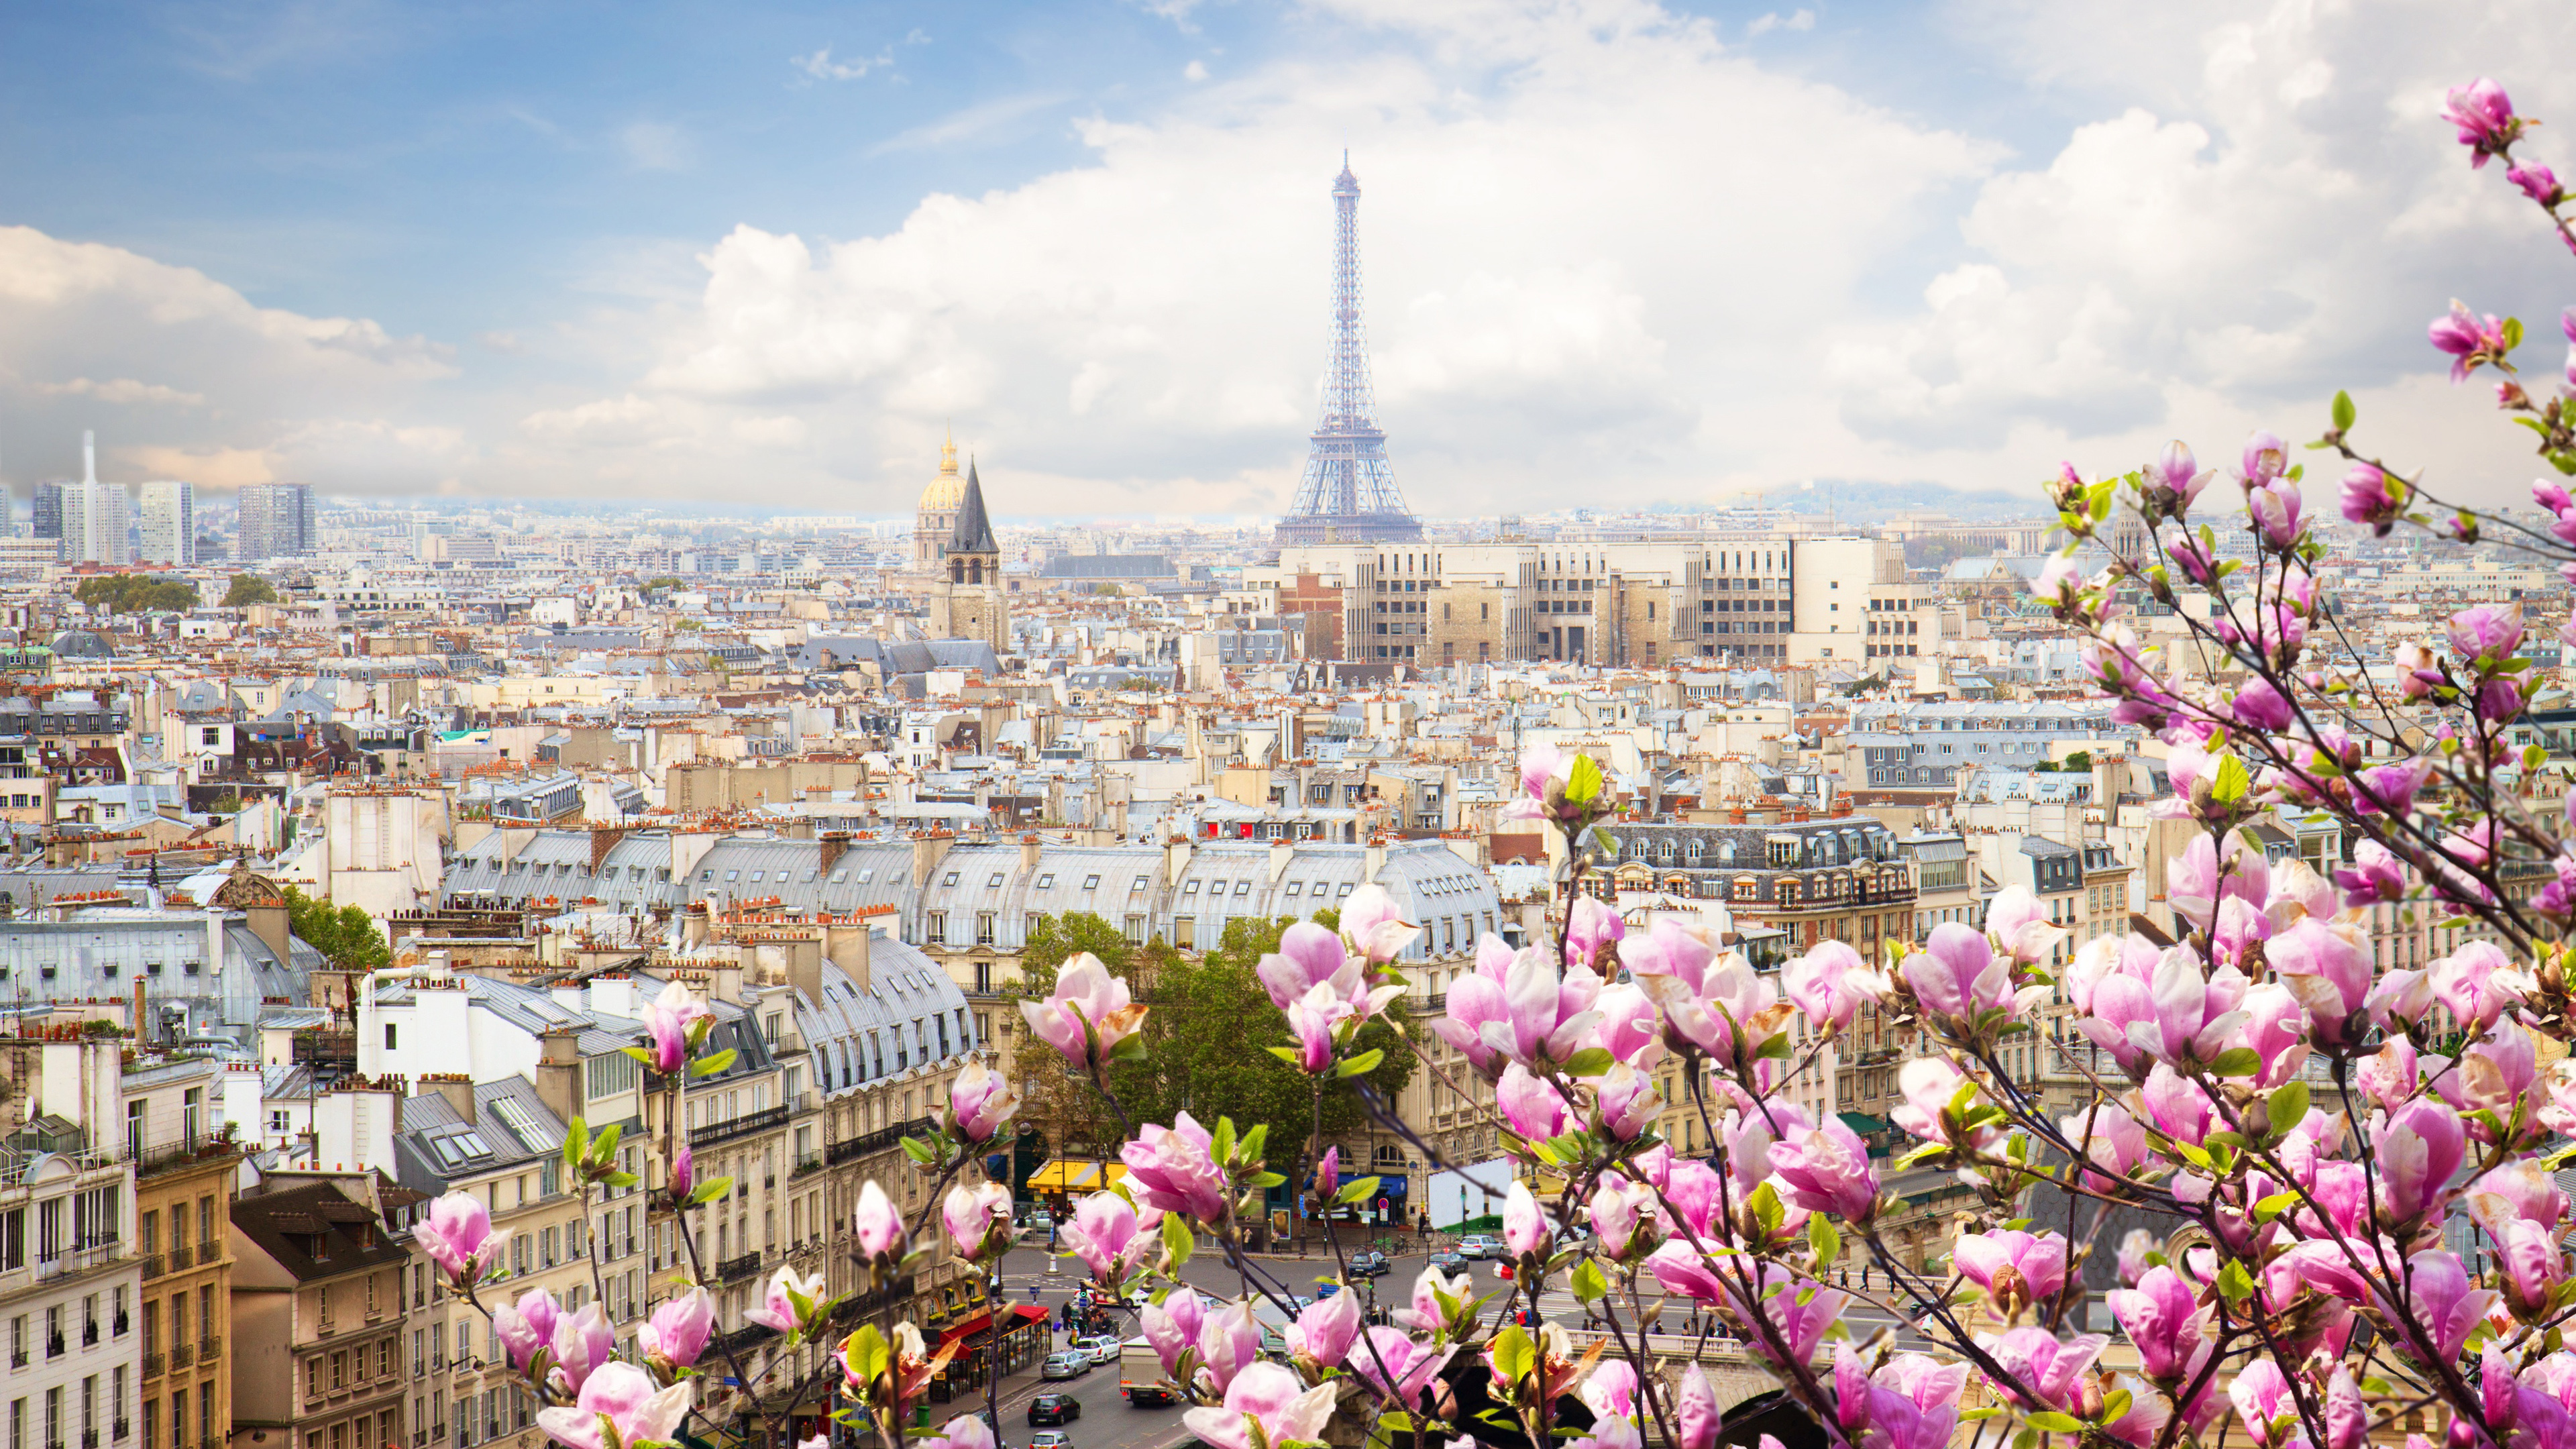 Paris Eiffel Tower And Cityscape With Purple Flowers In Front With Wallpaper Of Blue Sky And Clouds K 2K Travel